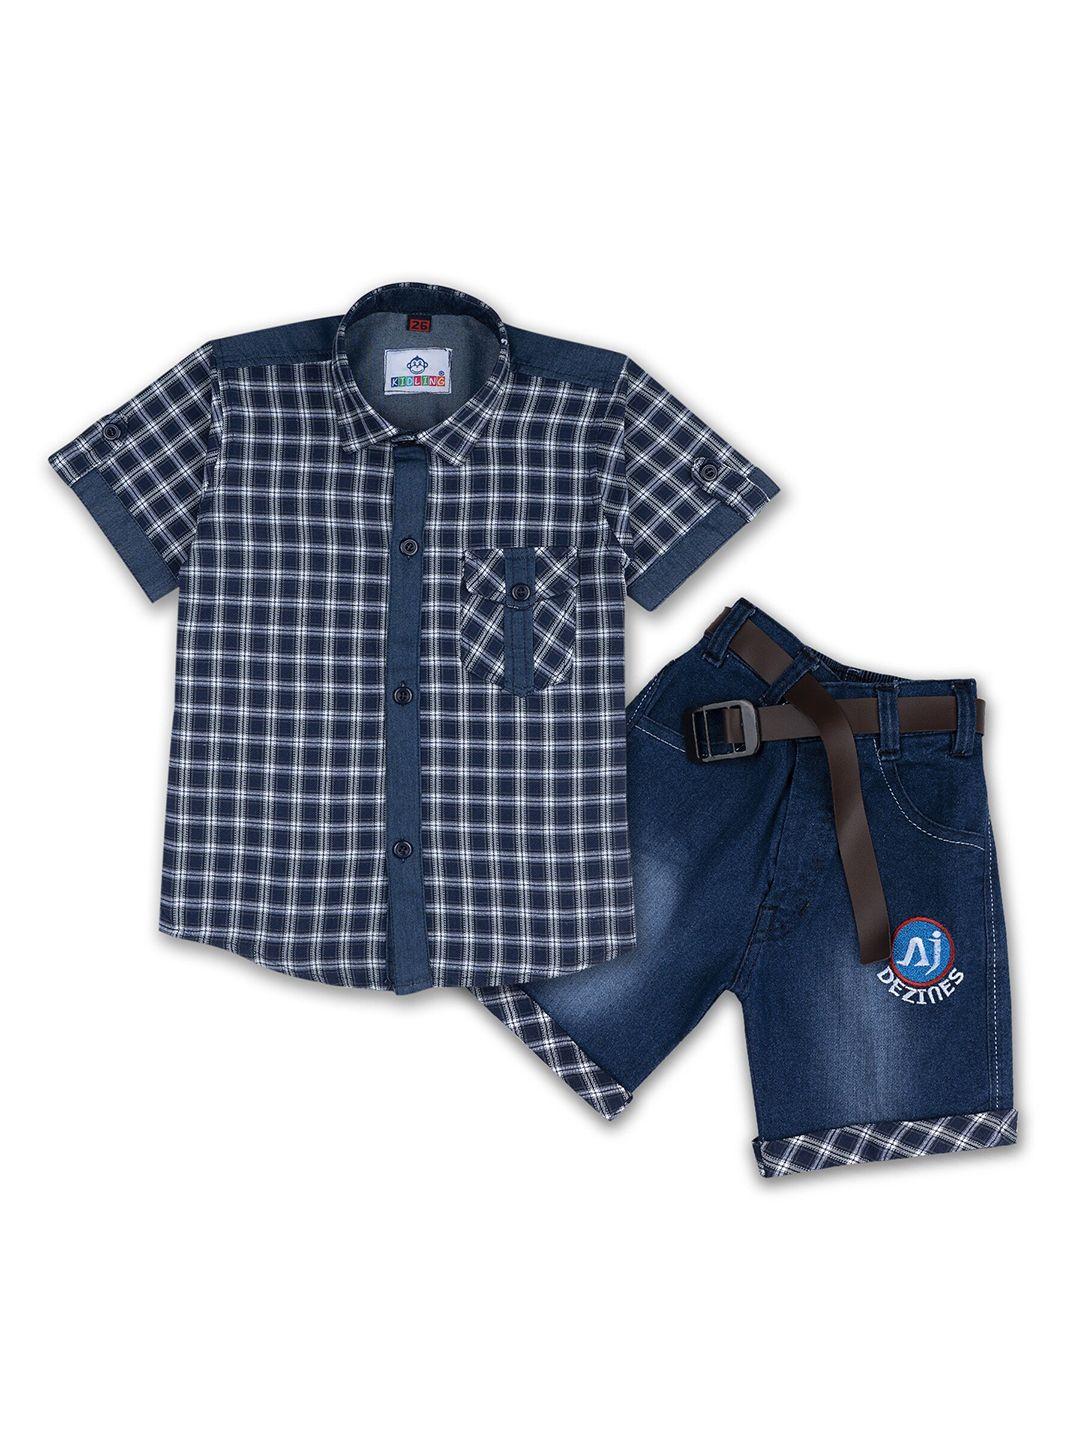 kidling boys white & blue checked shirt with shorts